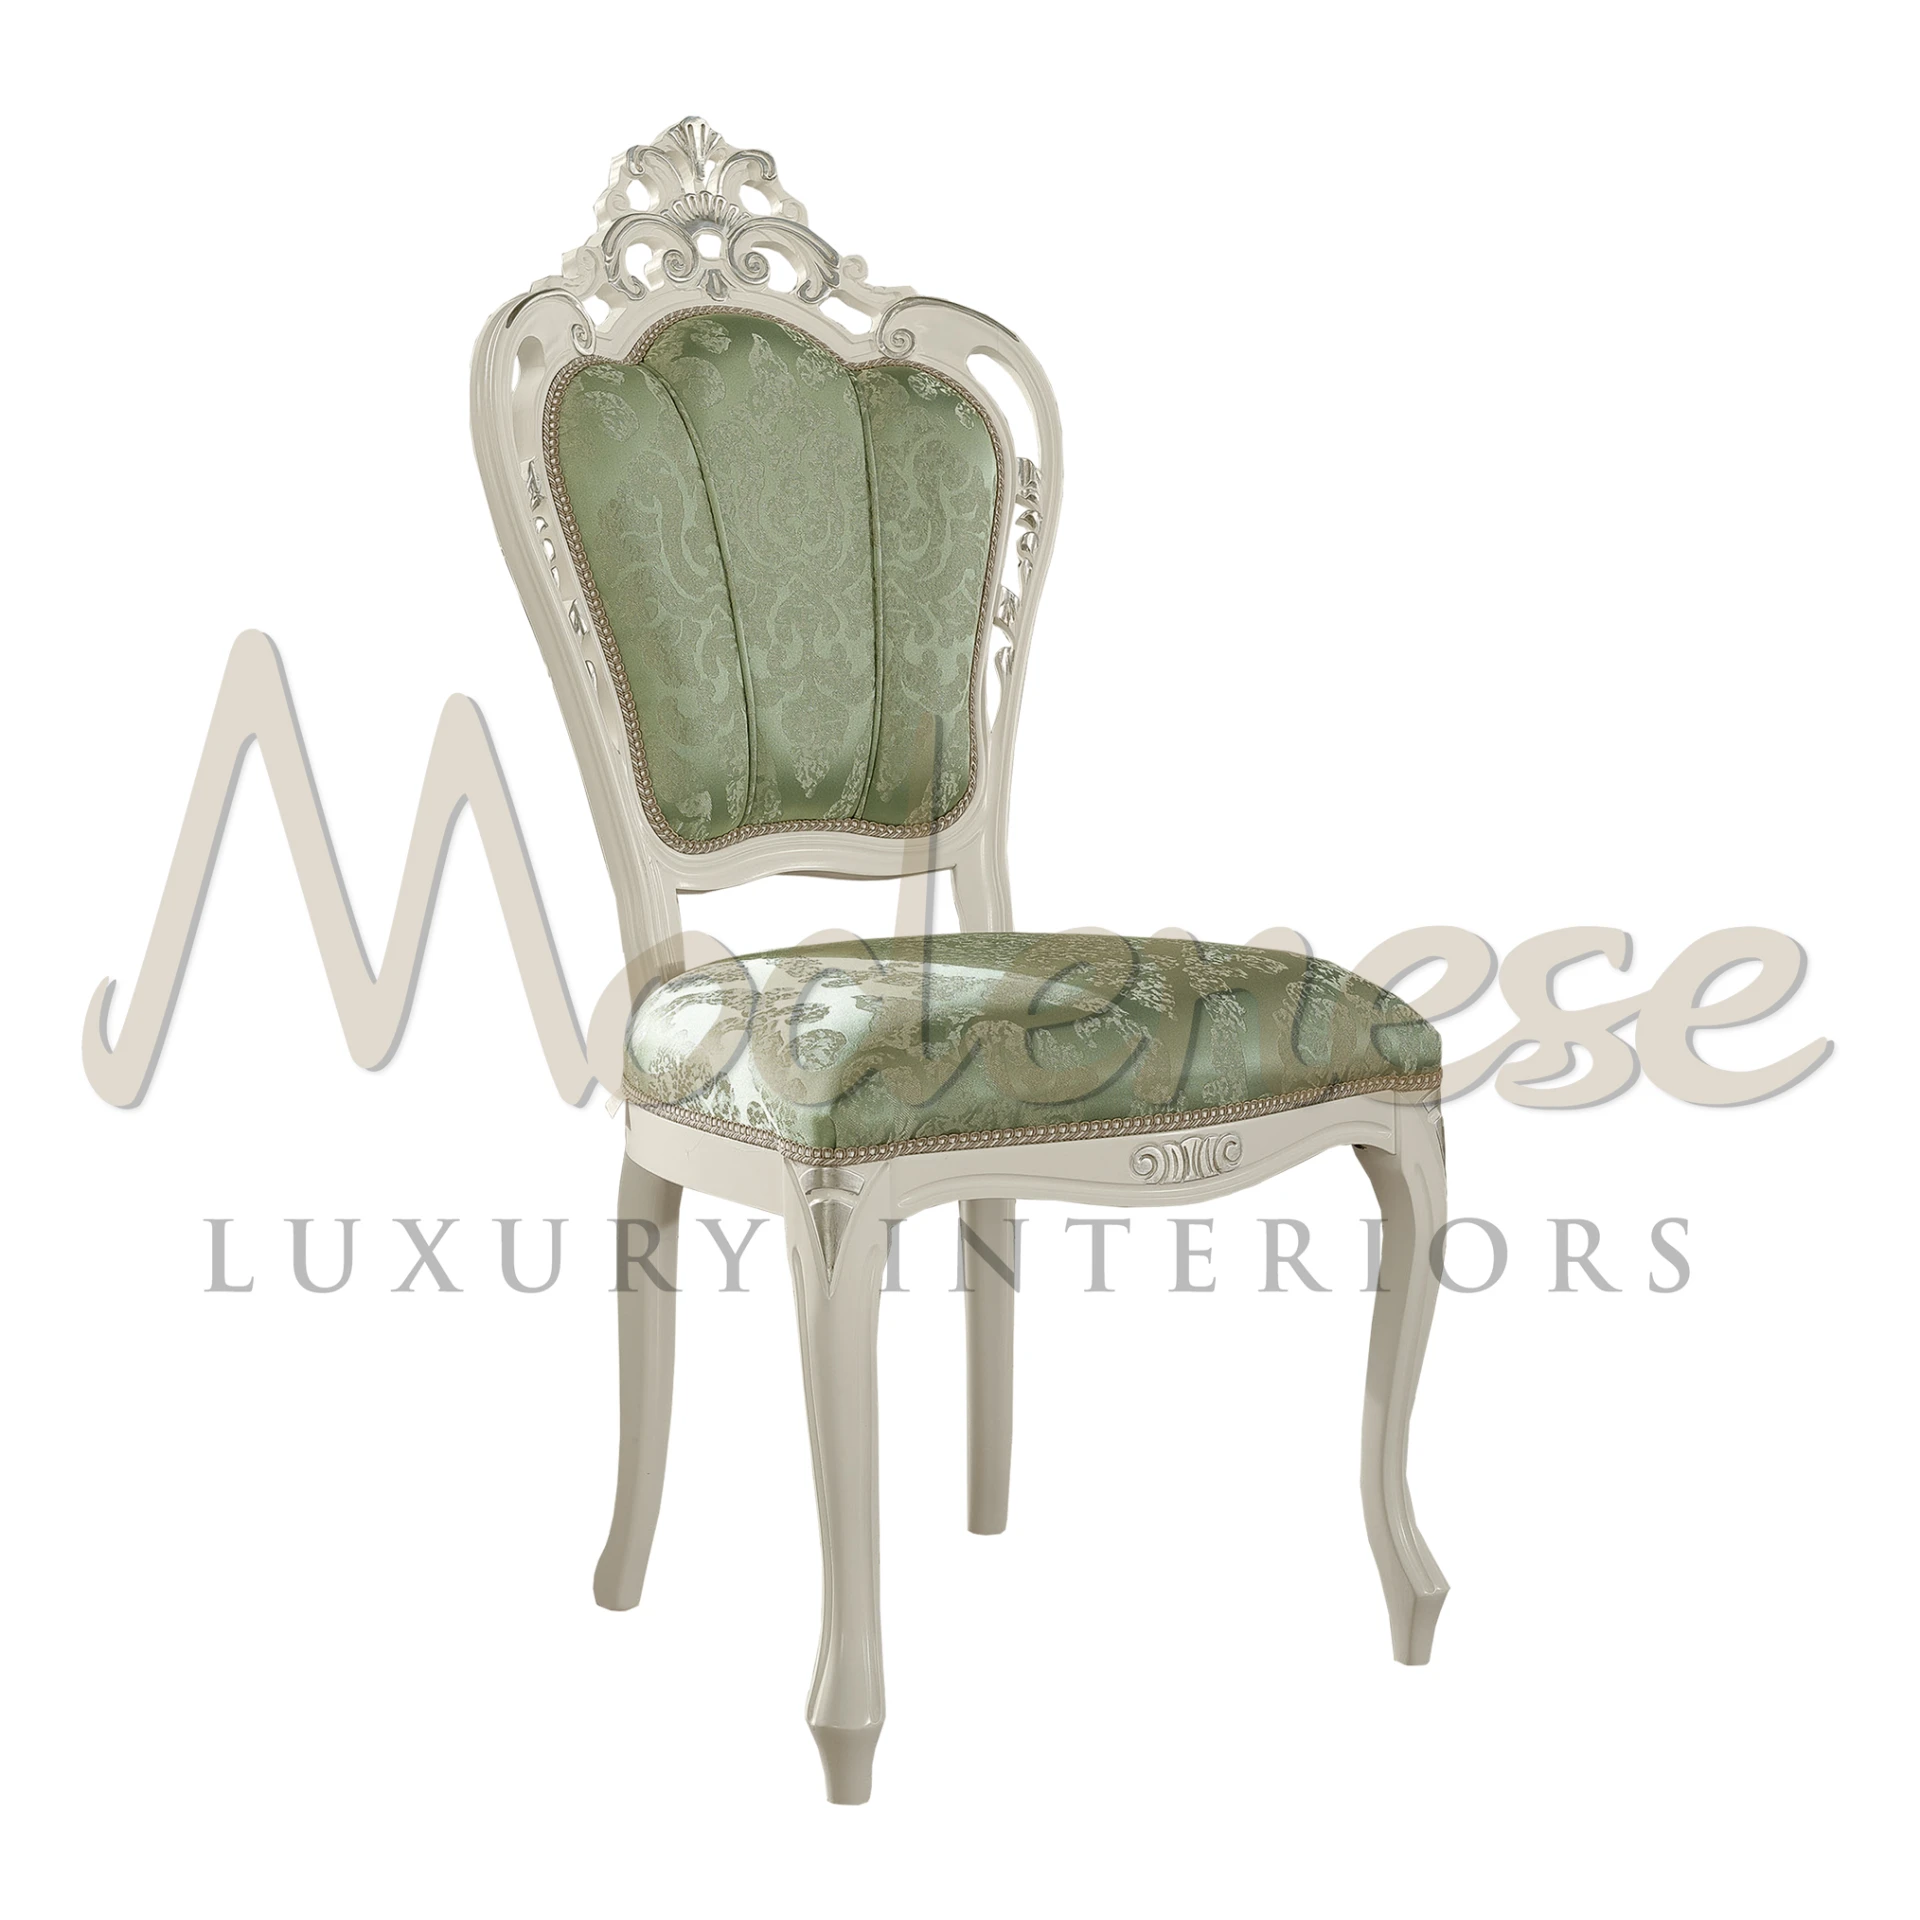 From Modenese Furniture's classic collection, this chair boasts a curved wooden frame, silver leaf accents, and plush green upholstery.